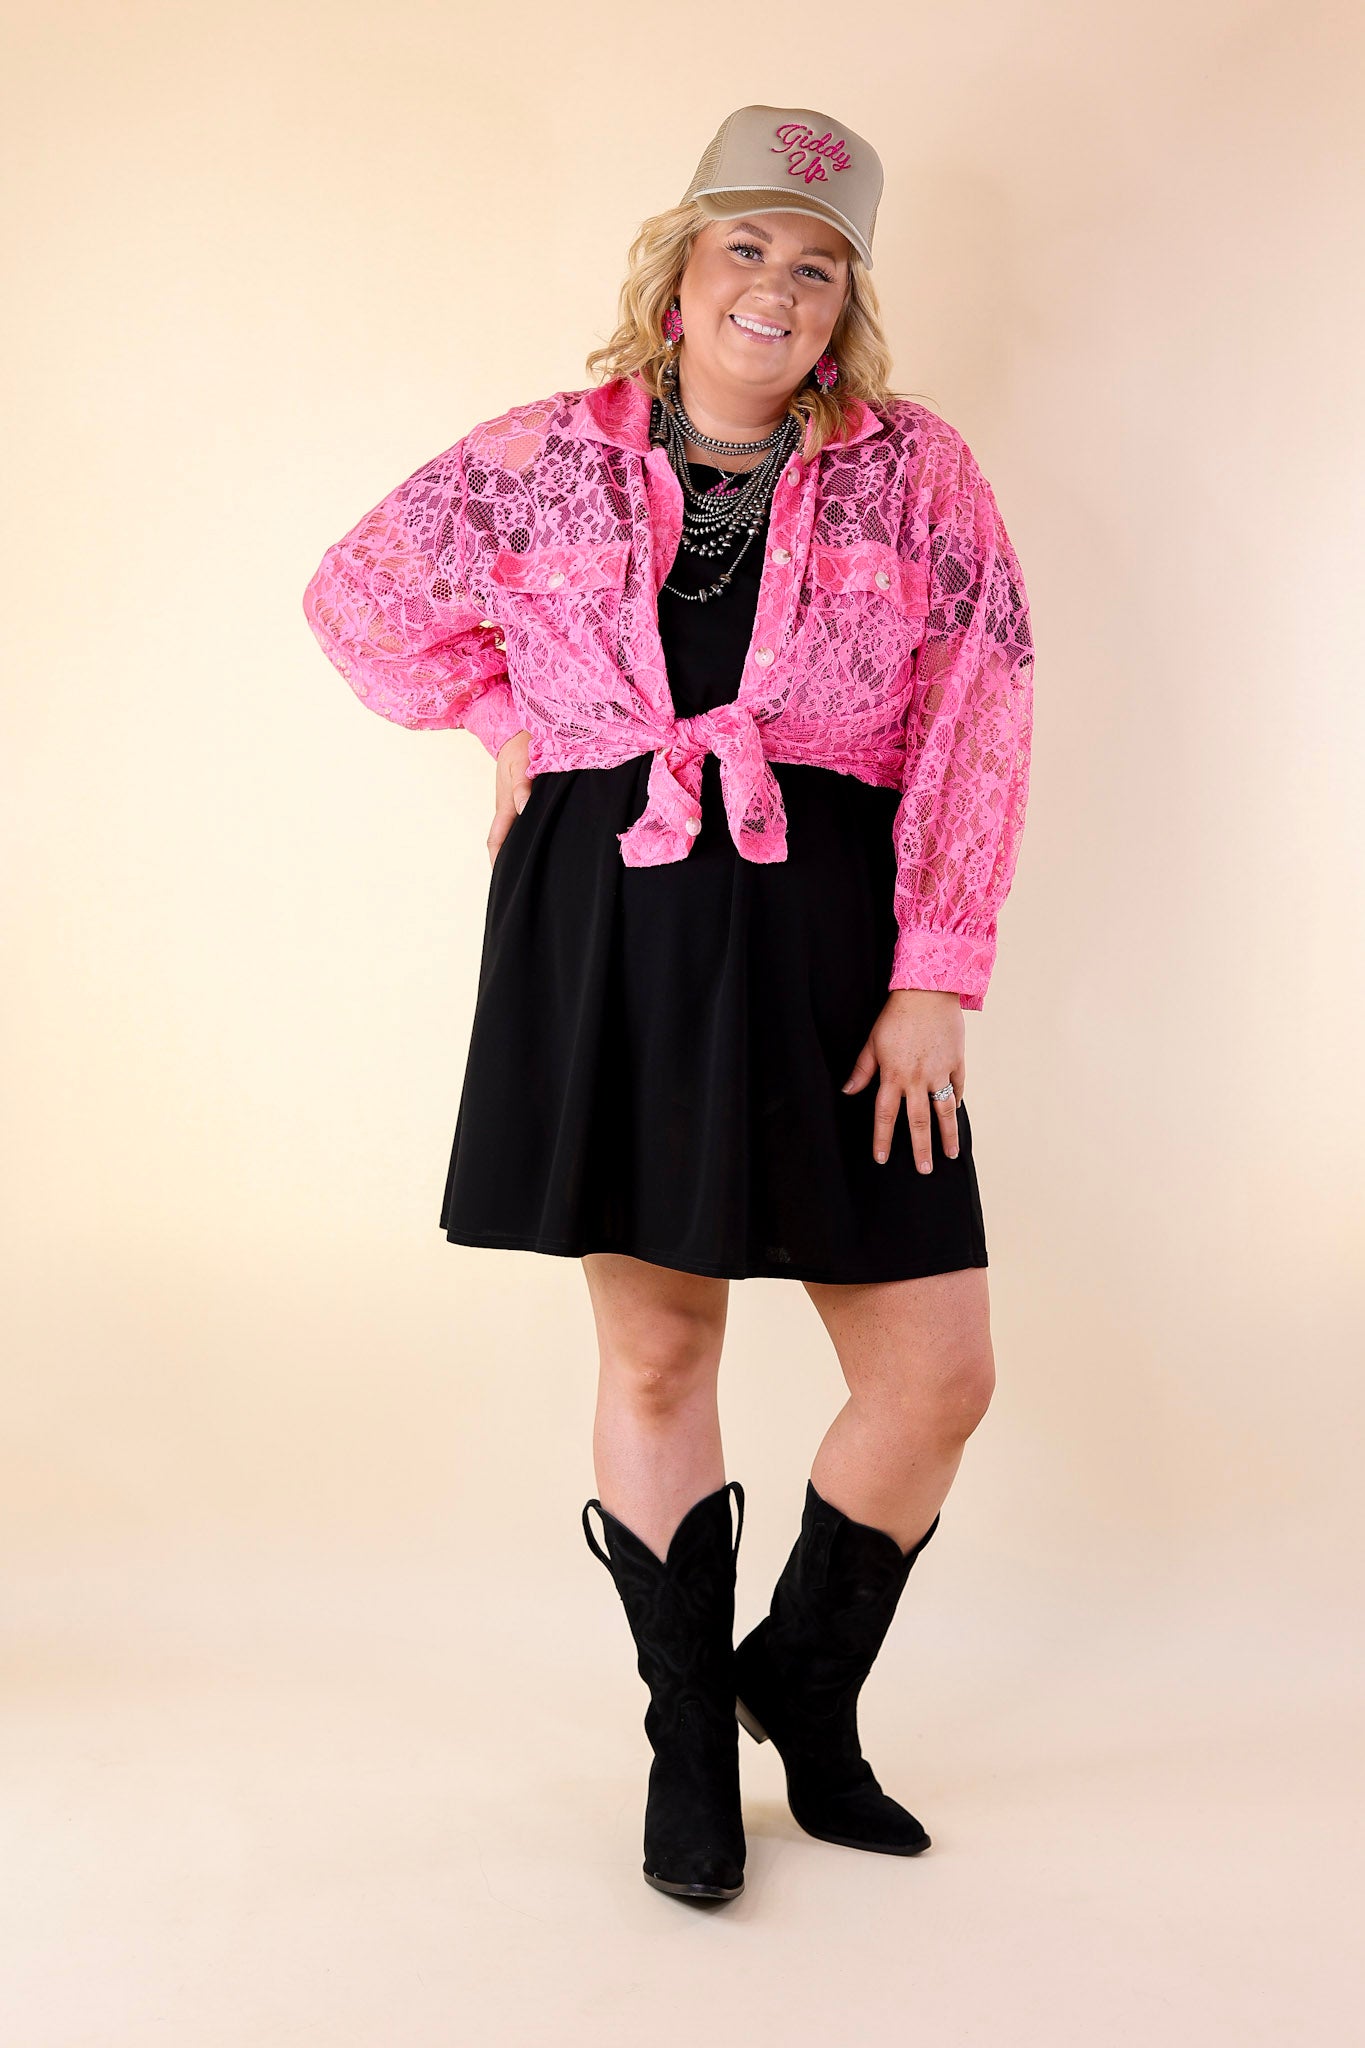 Sheer Chic Collared Button Up Lace Top in Pink Cosmos - Giddy Up Glamour Boutique